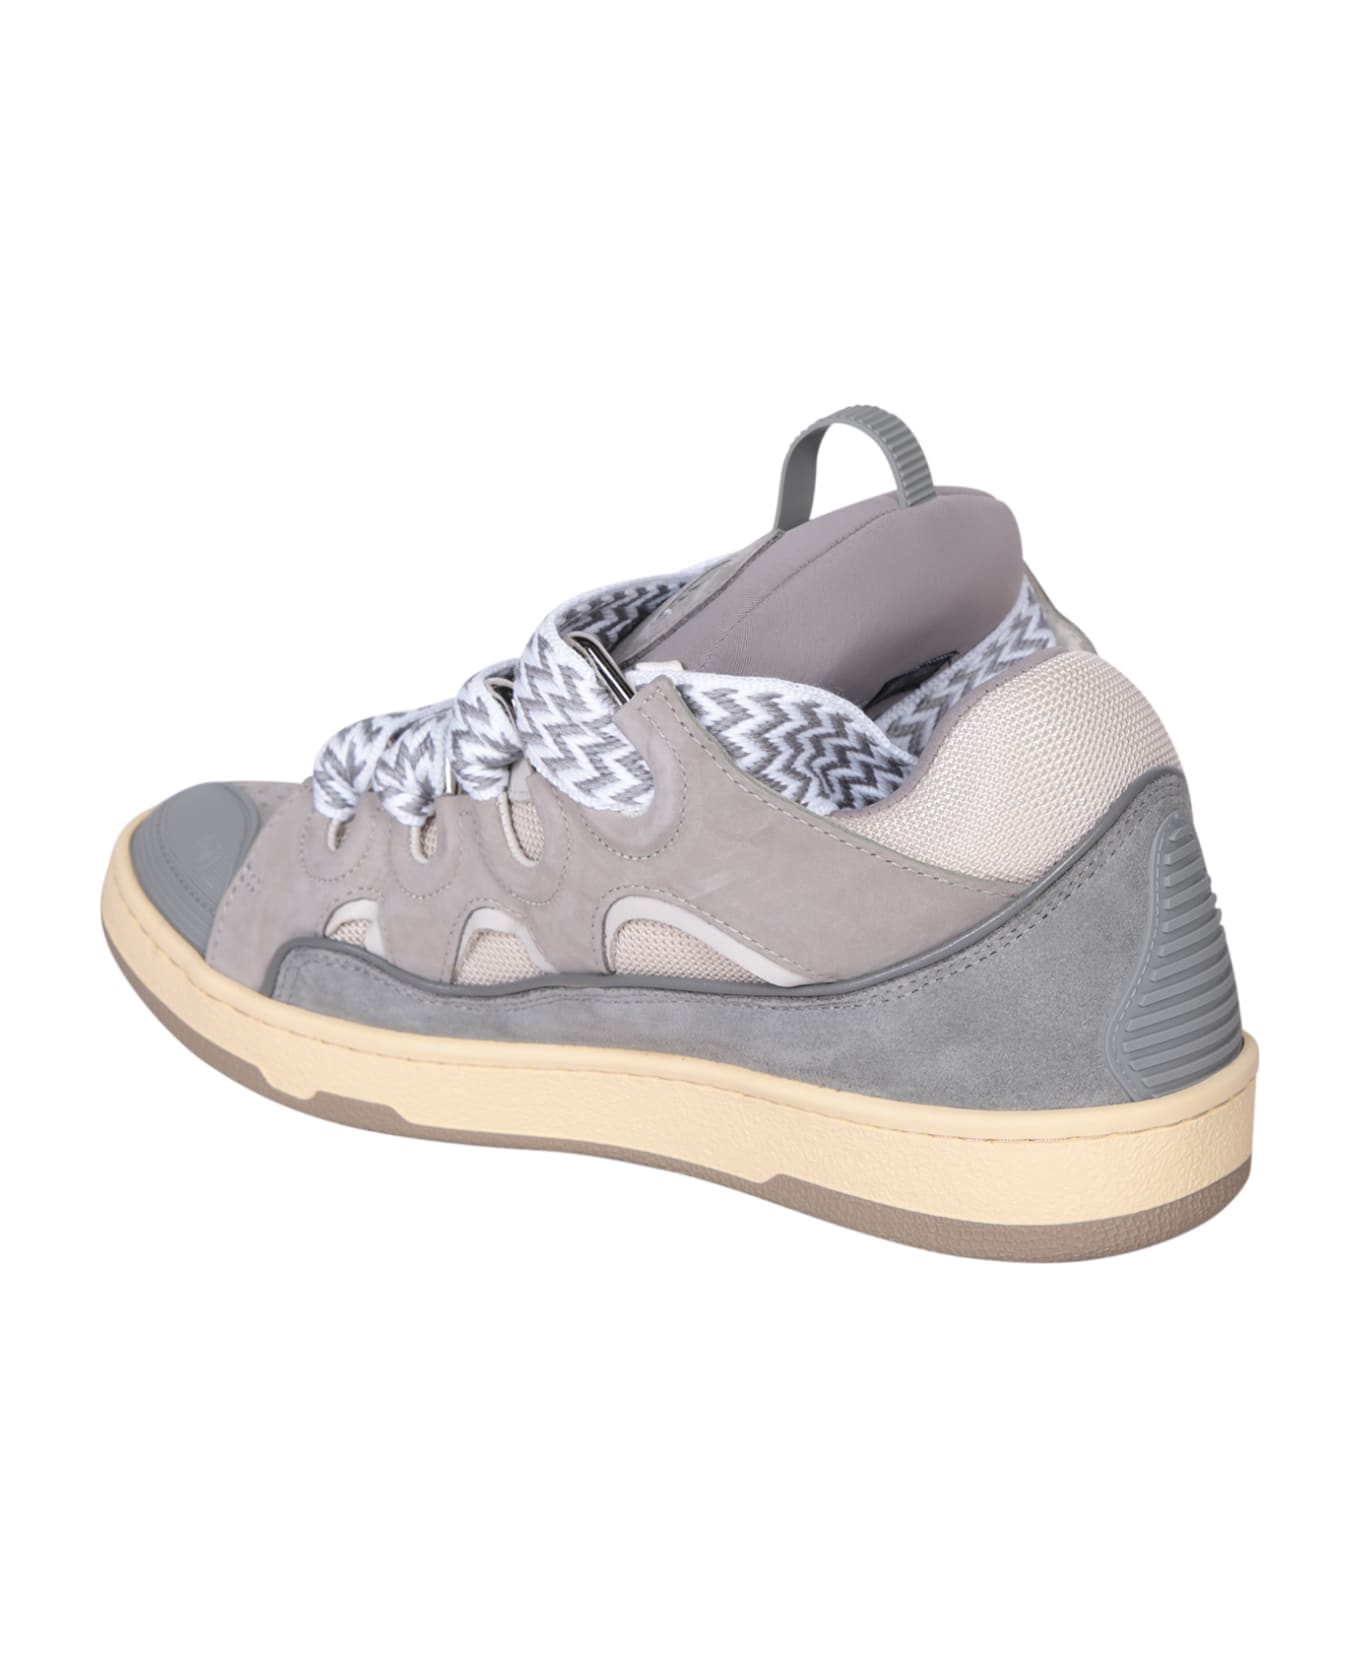 Lanvin Thick Lace Sneakers - Grey 2 スニーカー